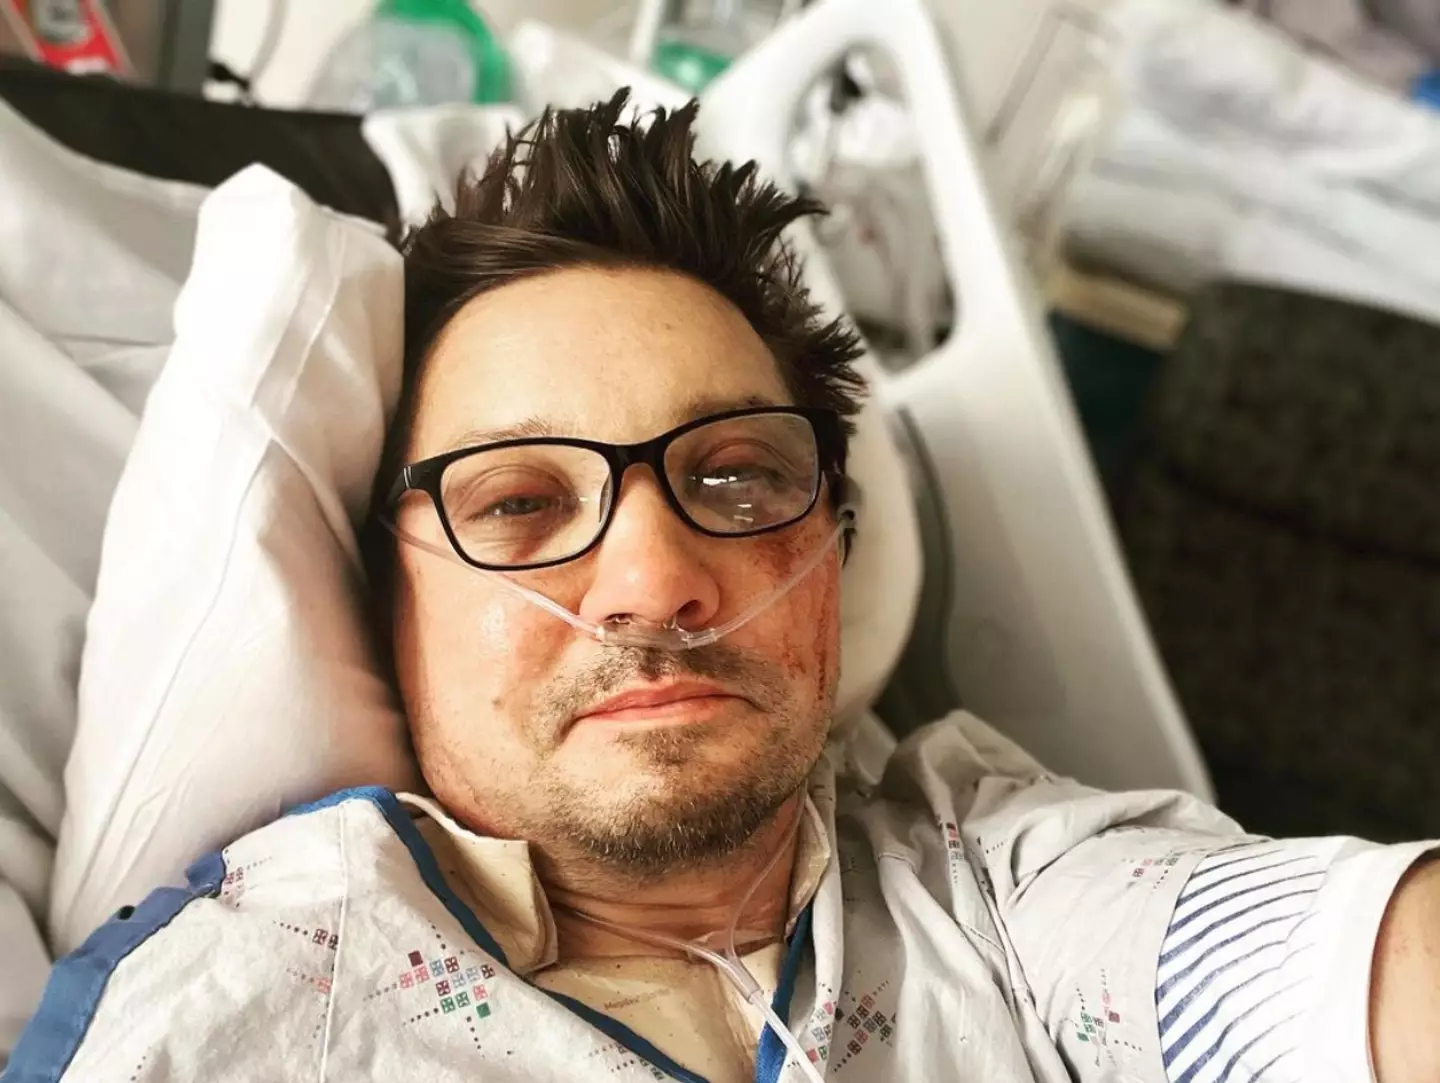 Jeremy Renner was involved in the terrifying accident earlier this month.